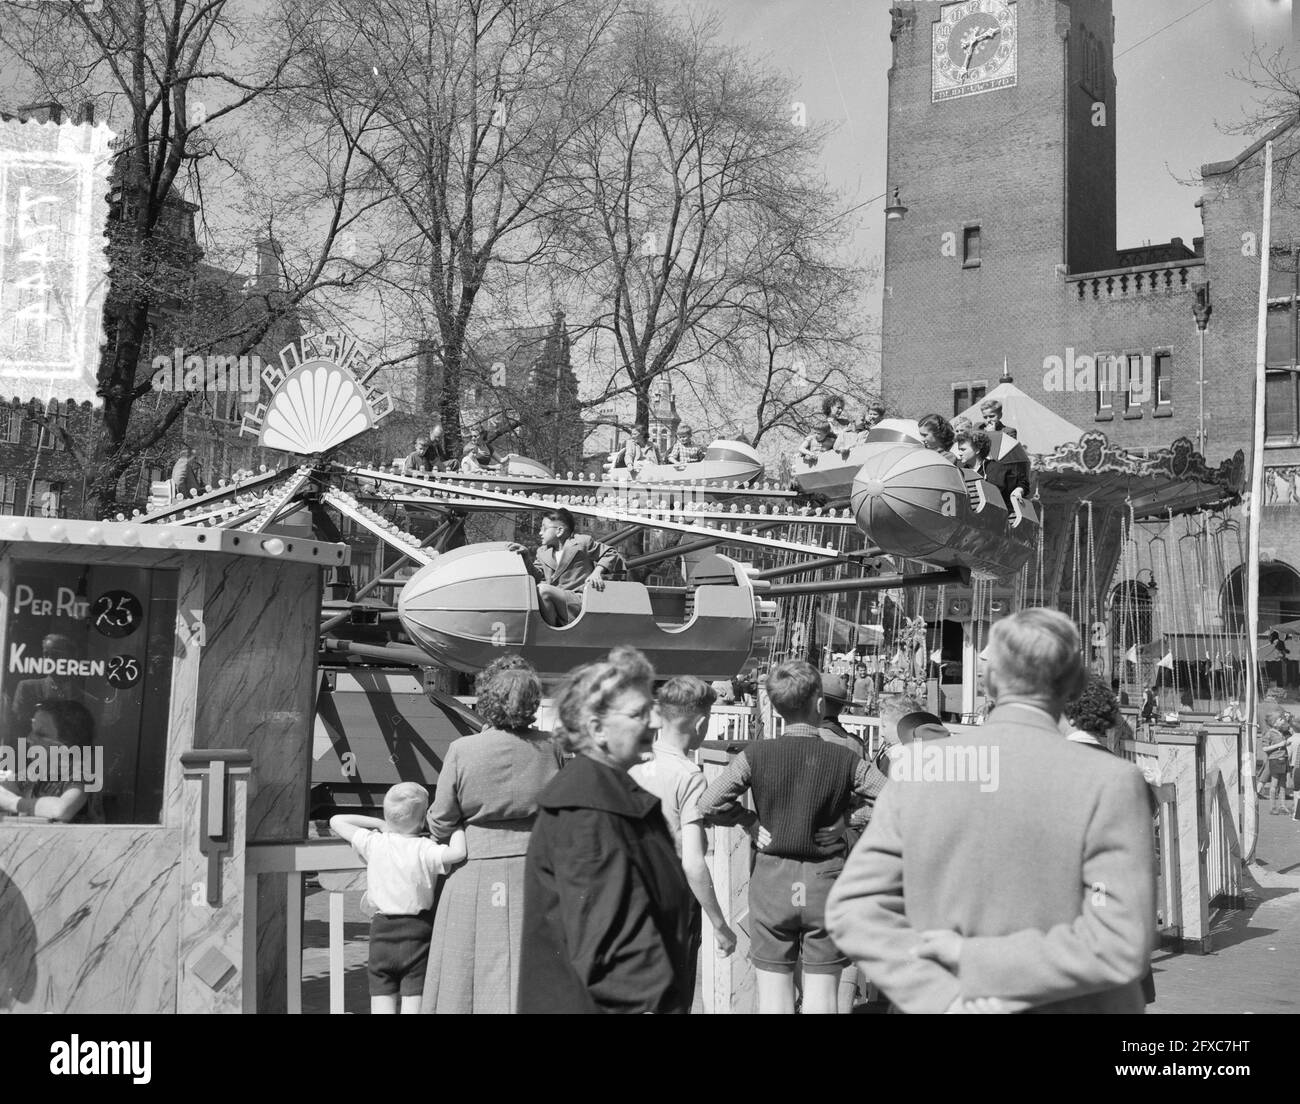 National holiday; fair at the Beursplein in Amsterdam, May 5, 1956, exhibition buildings, fairgrounds, The Netherlands, 20th century press agency photo, news to remember, documentary, historic photography 1945-1990, visual stories, human history of the Twentieth Century, capturing moments in time Stock Photo